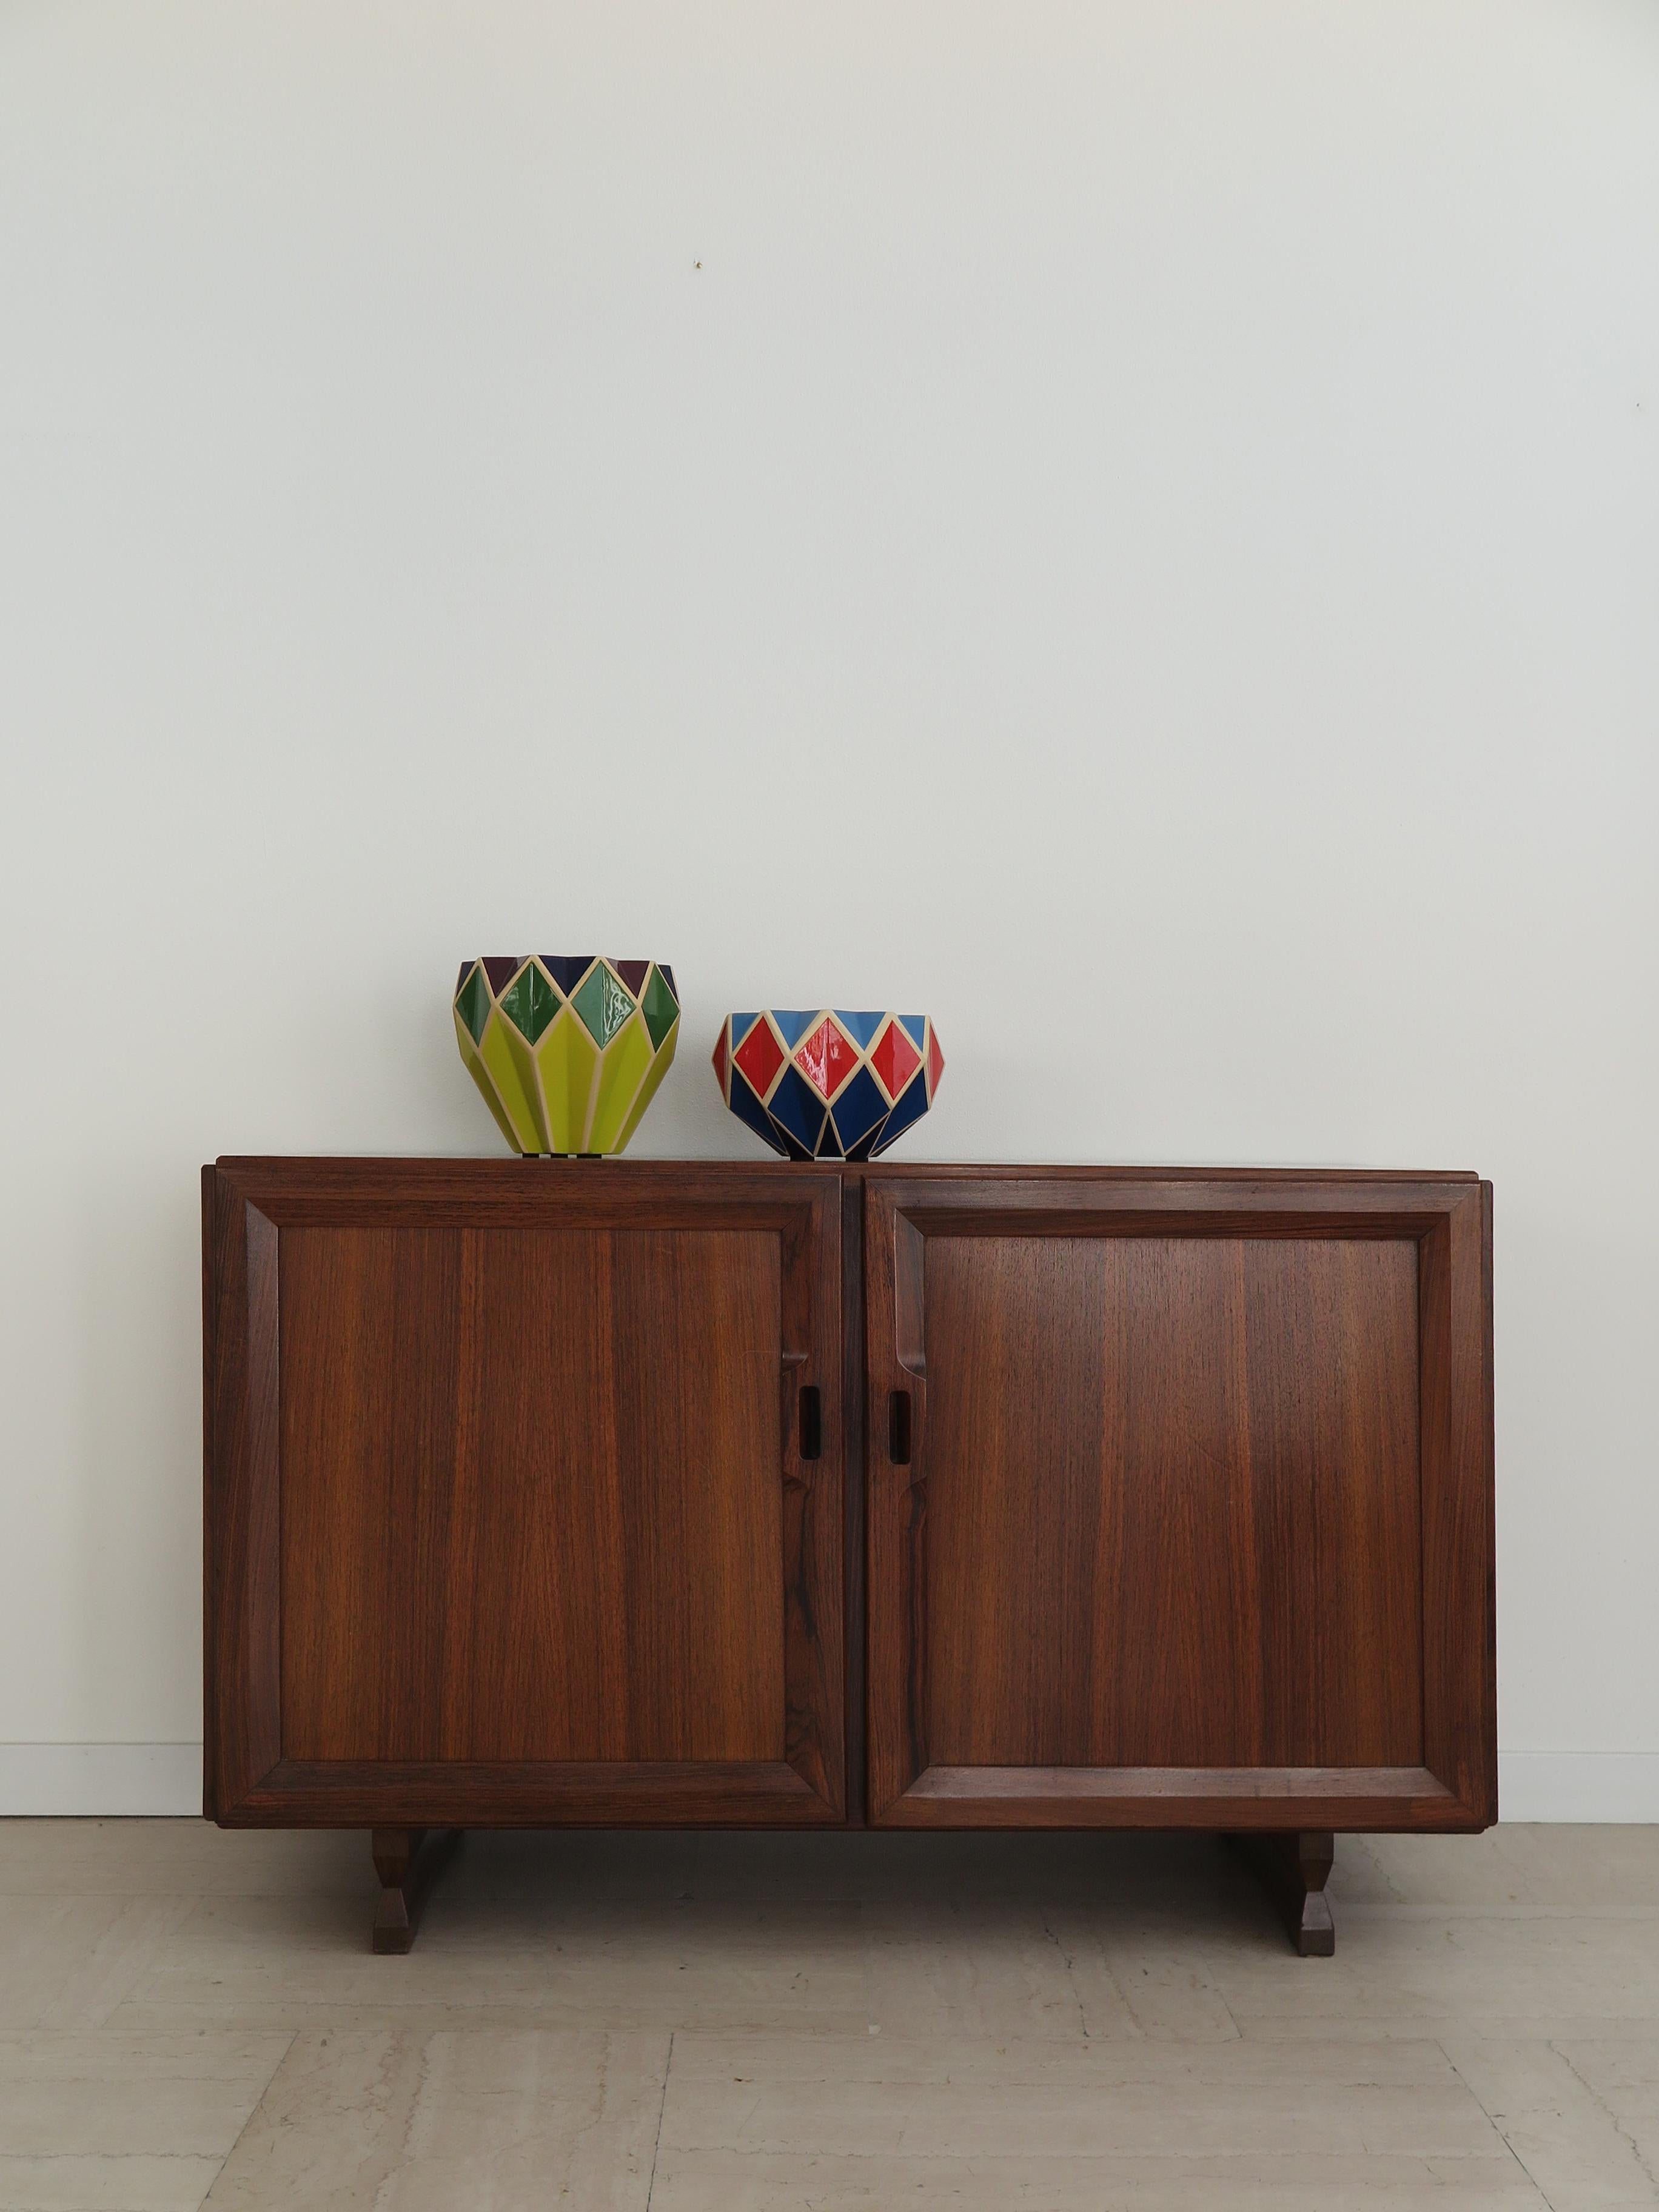 Italian rare and famous dark wood midcentury modern design sideboard model MB15 designed by Franco Albini for POGGI Pavia in 1958,
model with two doors, sliding shelve and a pull-out shelf/tray.
Wood veneer, feet, door frames and details in solid